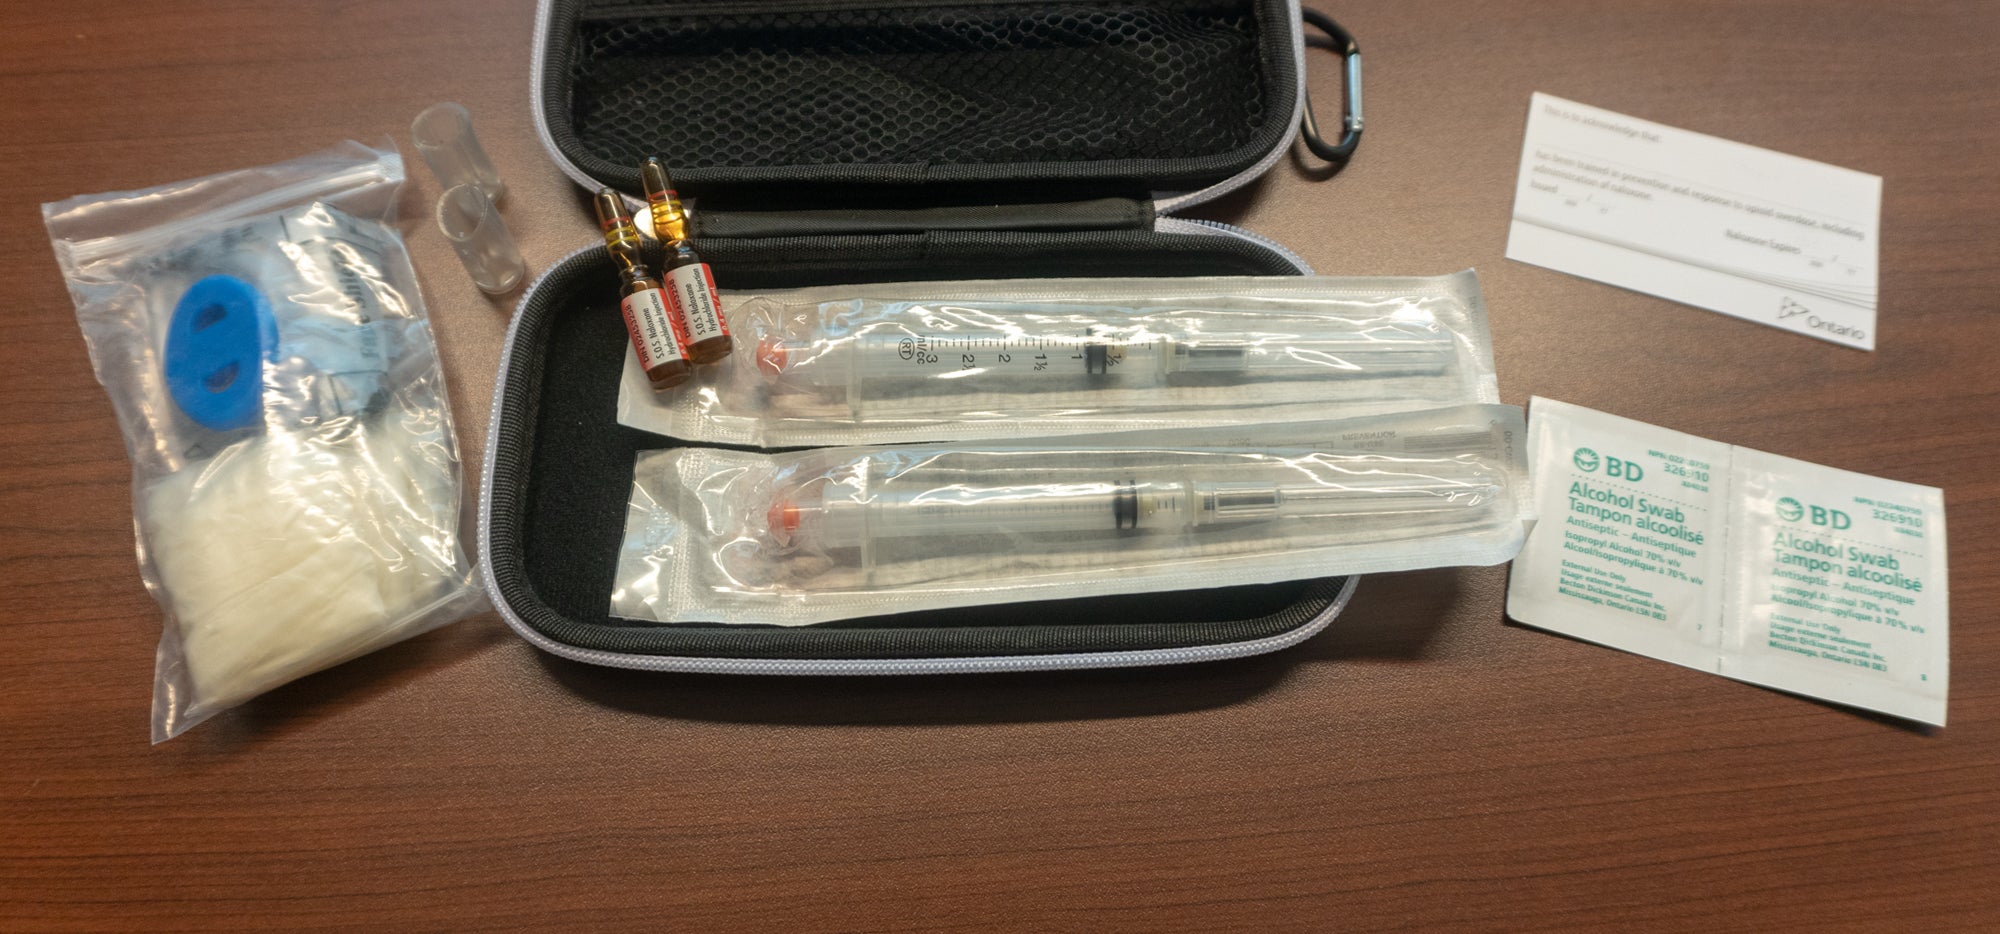 A naloxone kit with two ampules, needles, wipes, gloves and a mouth piece.